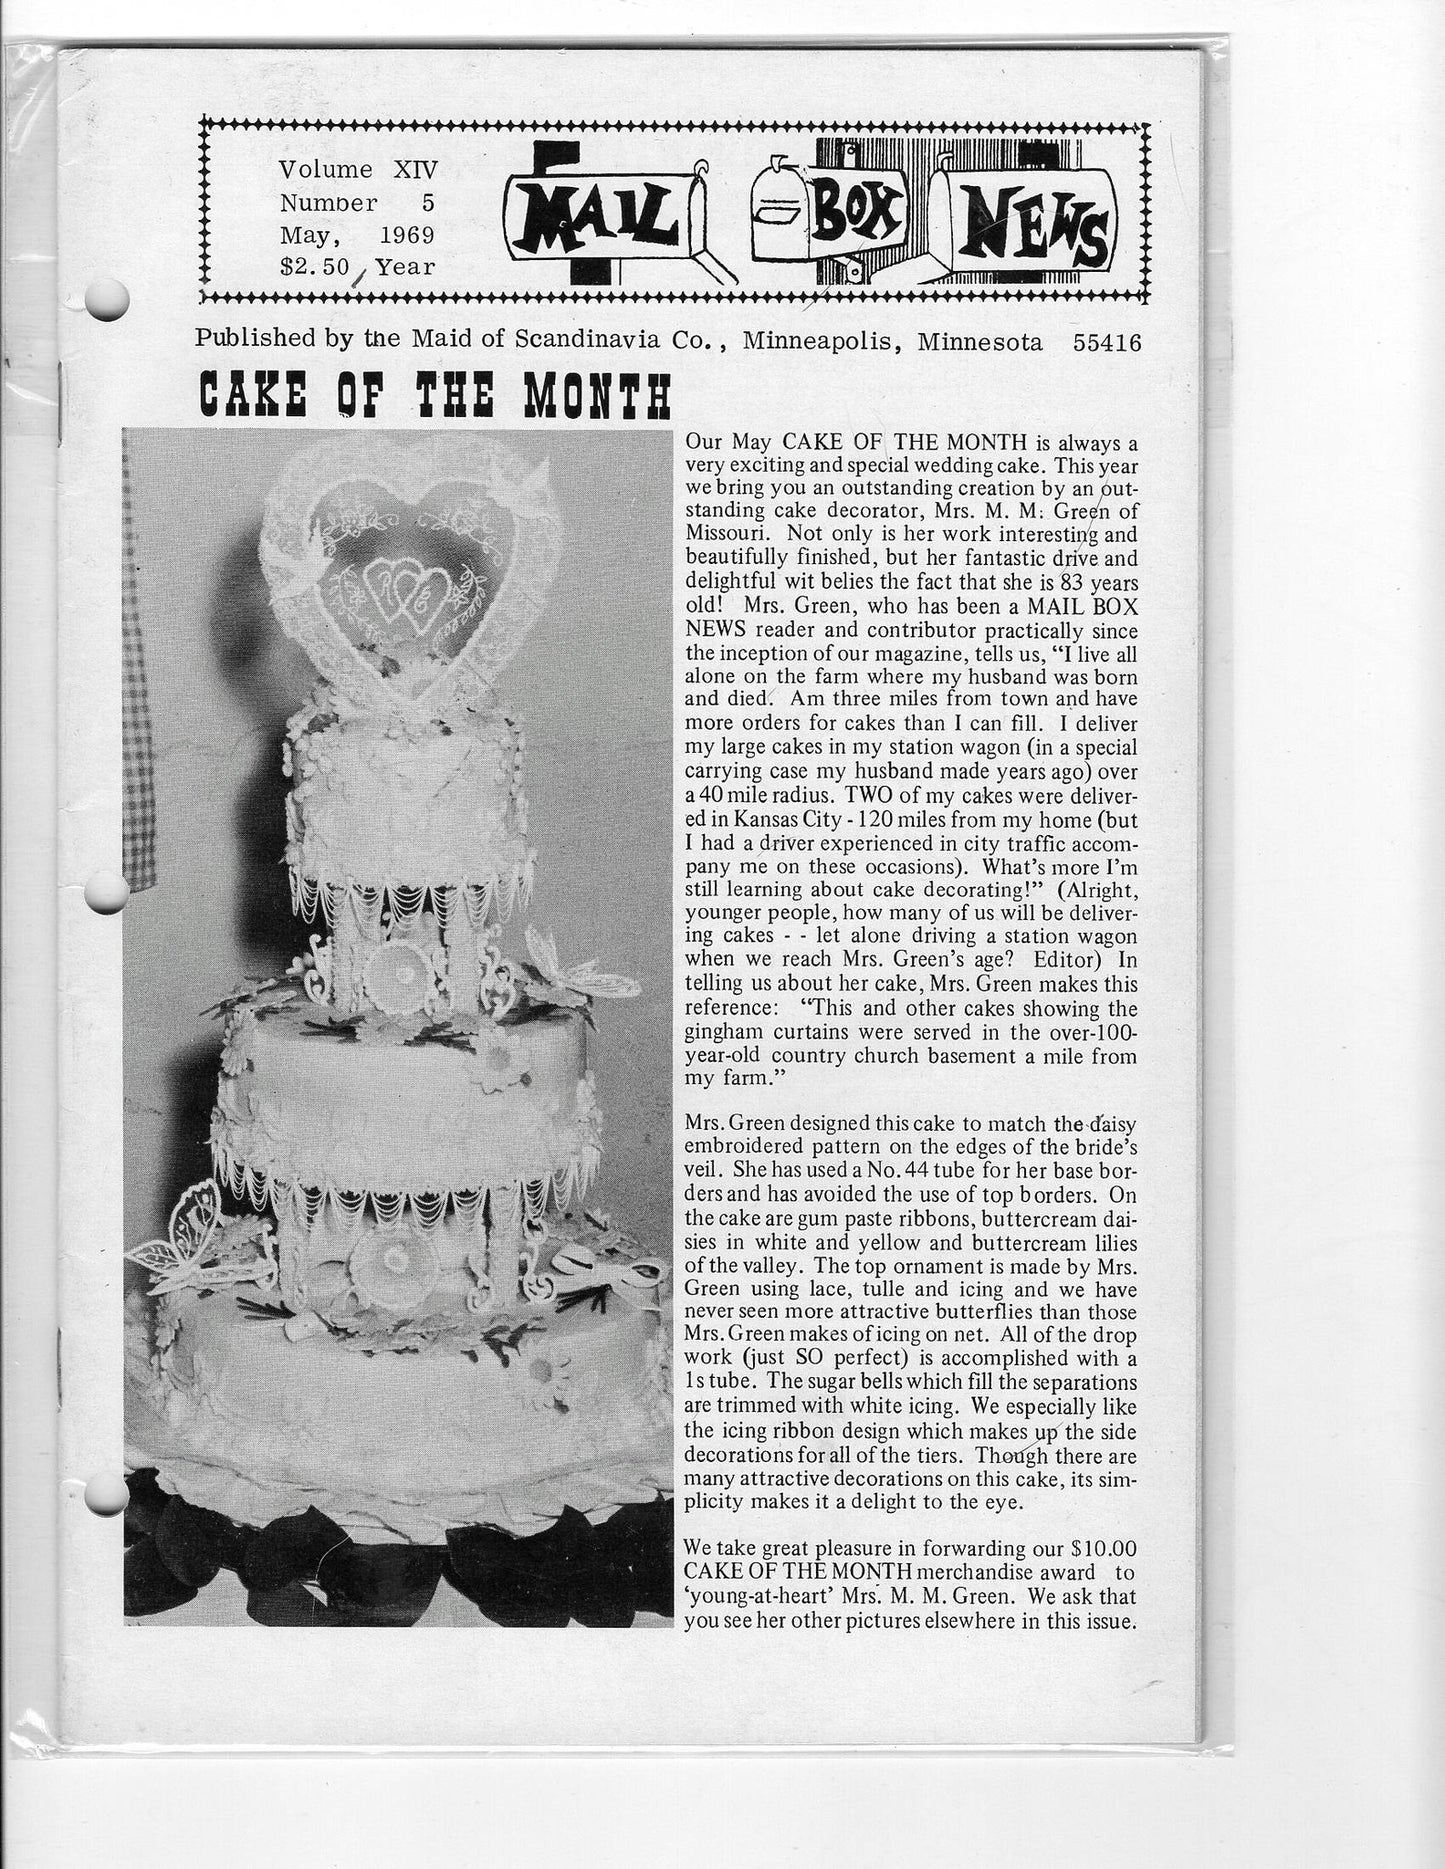 05 00 1969 Cake of the Month